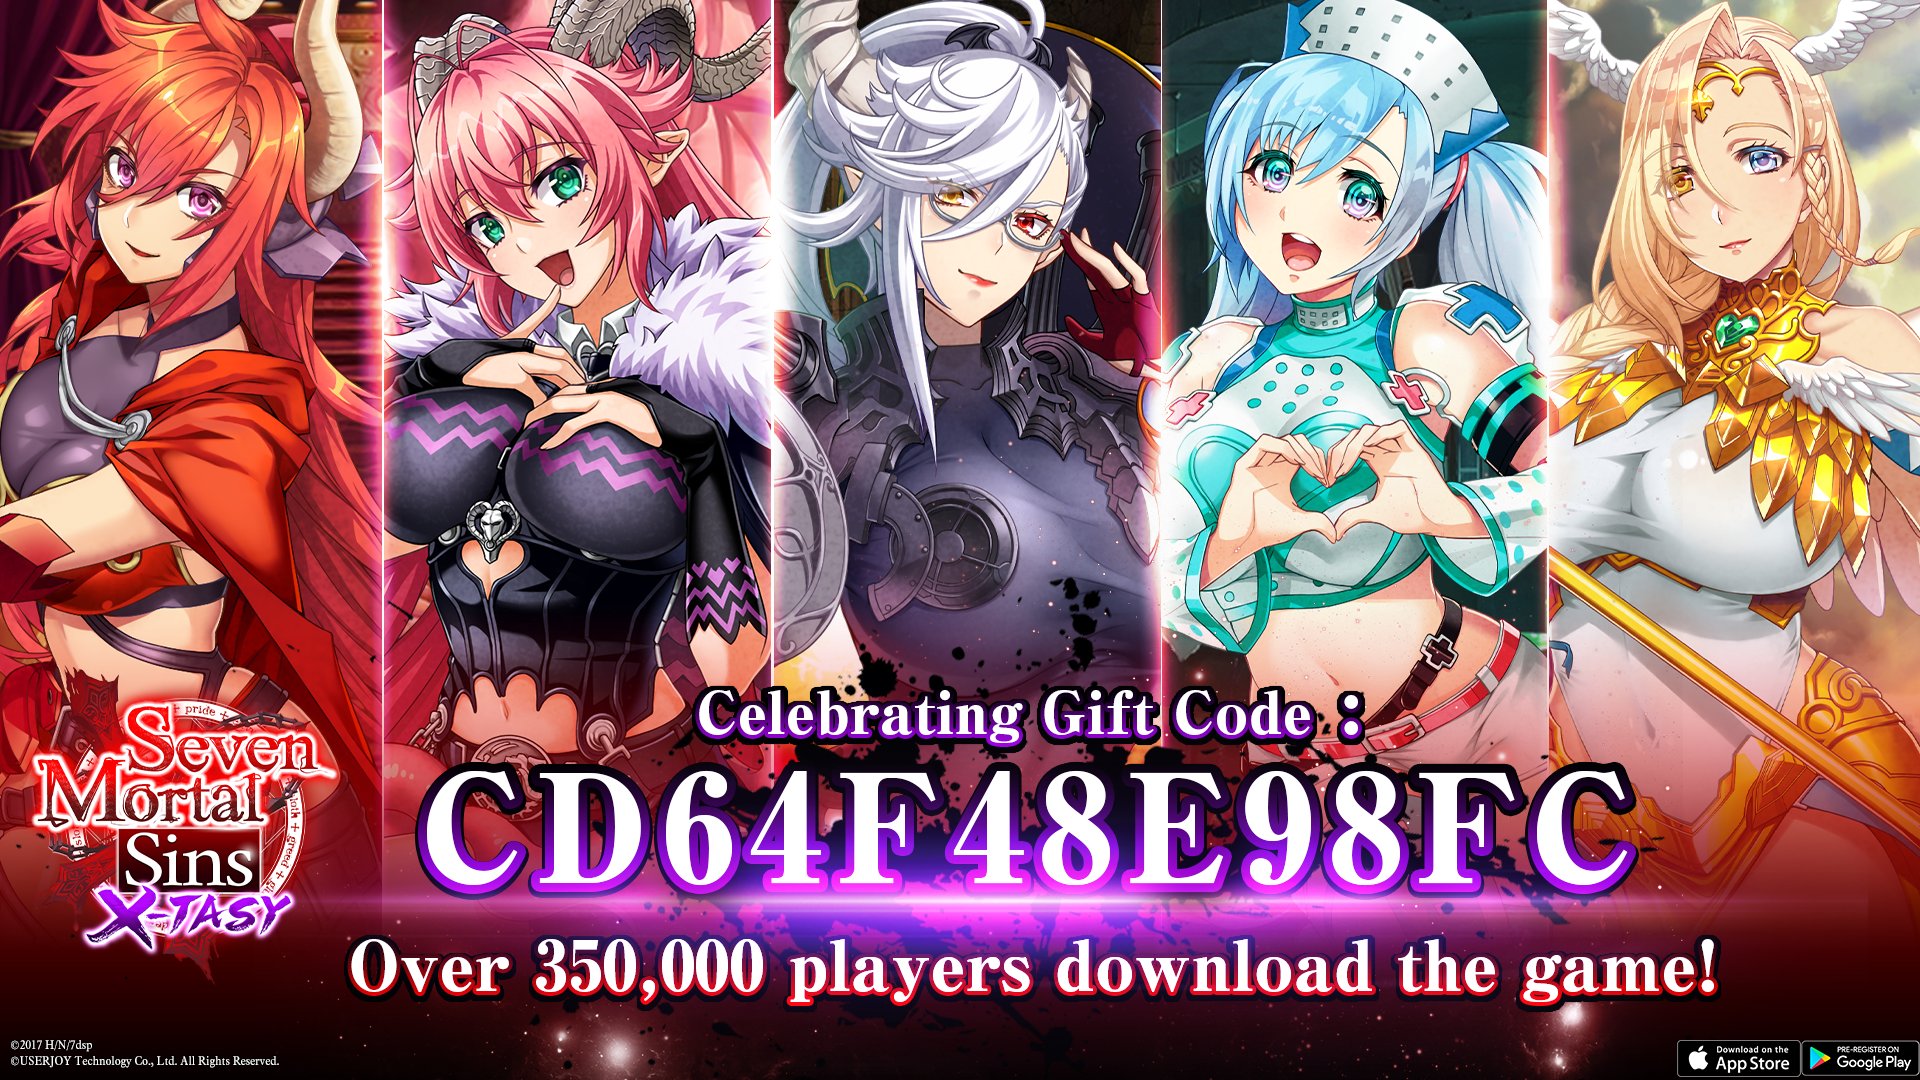 Seven Mortal Sins X-TASY on X: 🥳Download Celebration🥳 🎀Gift Code🎀  【CD64F48E98FC】 Dear worshippers, To celebrate “Seven Mortal Sins X-TASY”  has been downloaded by over 350,000 players, and we decided to send all